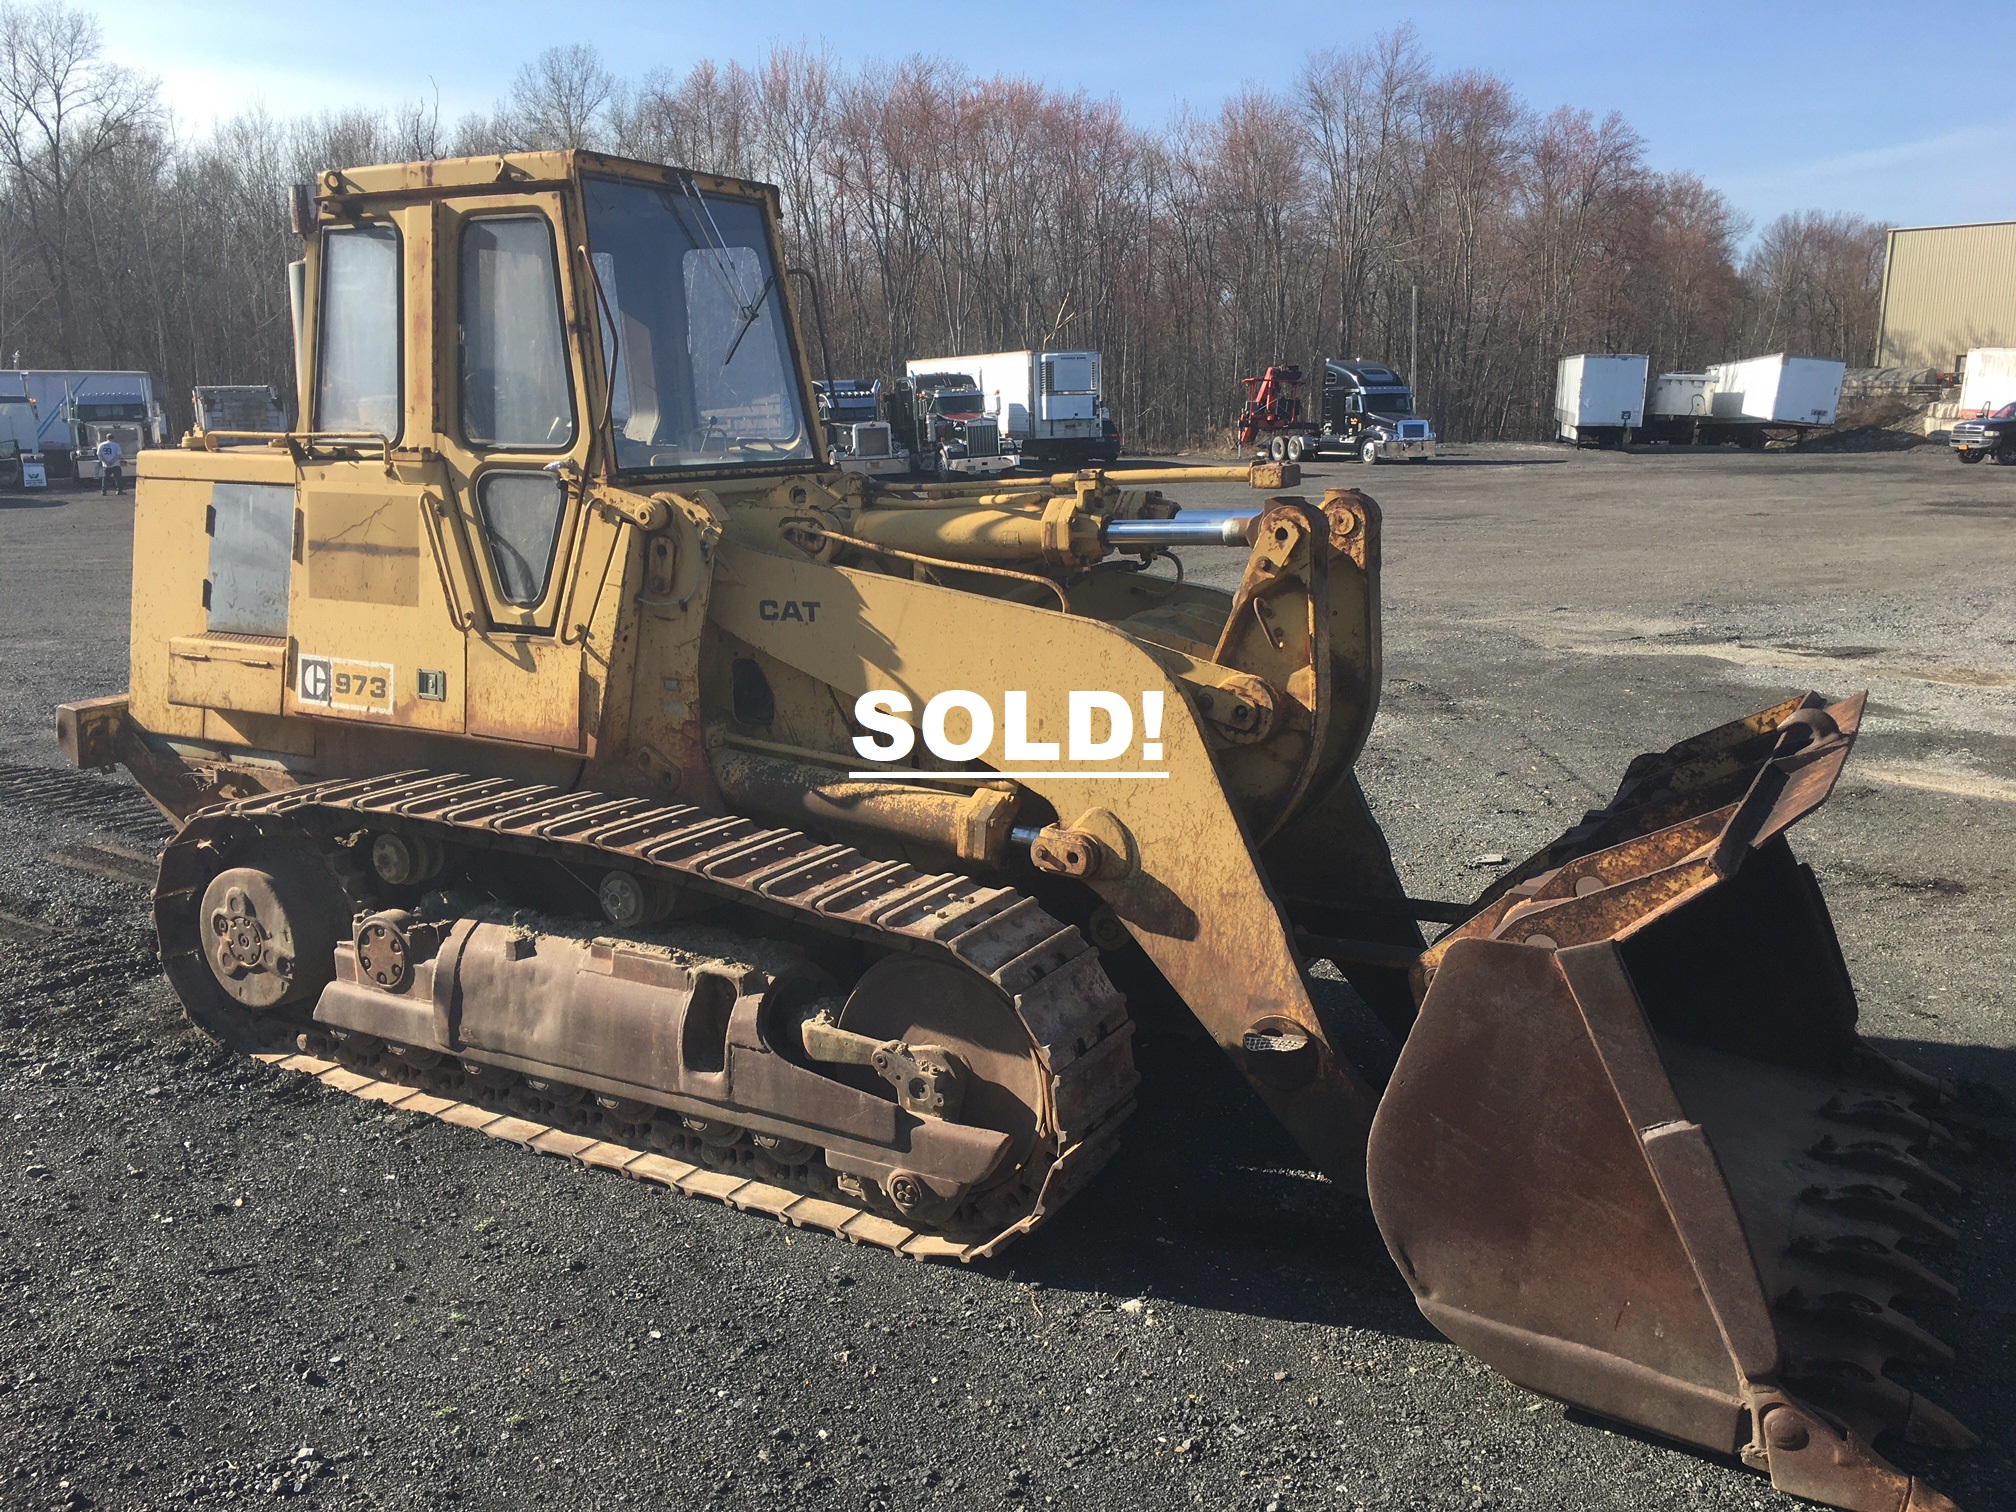 Caterpillar 973 Track Loader. 1994 turbo diesel 3306 engine with 210 horse power. Operating weight is 54'899 lbs. it's has a full height dump clearance of 10.96 ft. in. It's length is 23.37 ft. in. with bucket on the ground. the height is 11.24 ft. in. to top of cab. Left side track final drive does not work. Otherwise the track loader runs and operates as it should.